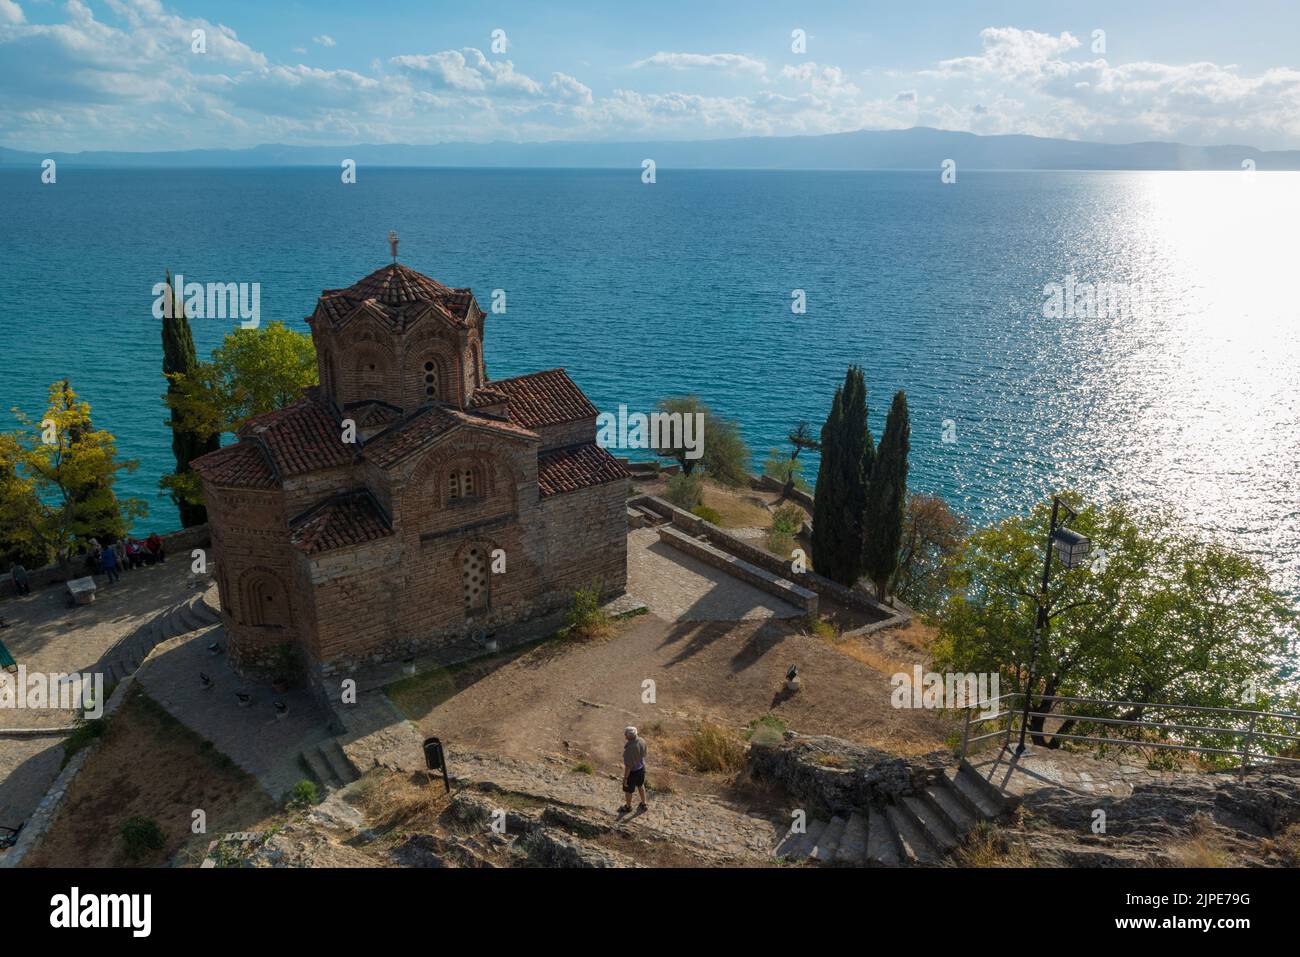 Orthodox Saint John at Kaneo church, situated on a cliff, seen from above, overlooking Lake Ohrid, North Macedonia Stock Photo